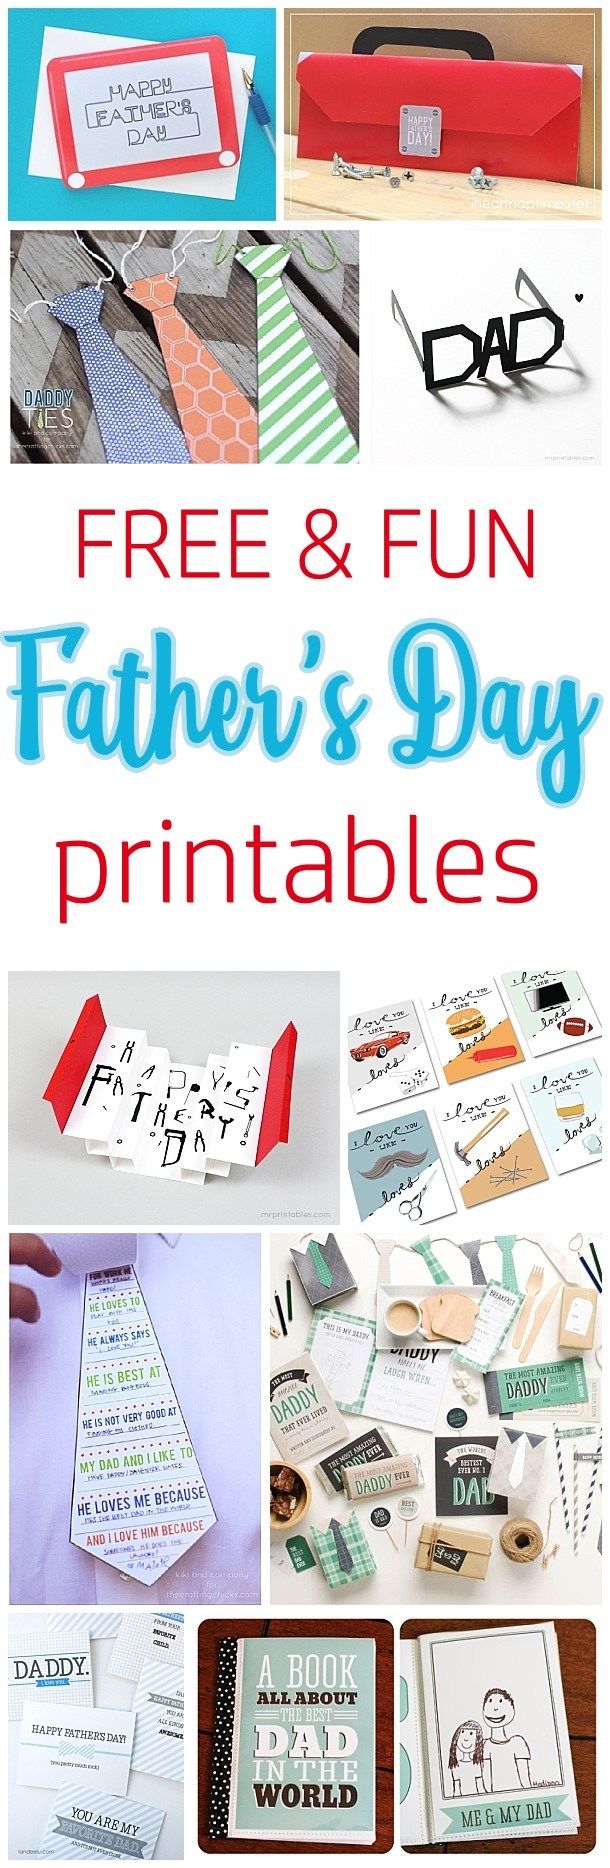 Free and Fun Father's Day Printables - Cards and Paper Crafts - EASY DIY Pro...